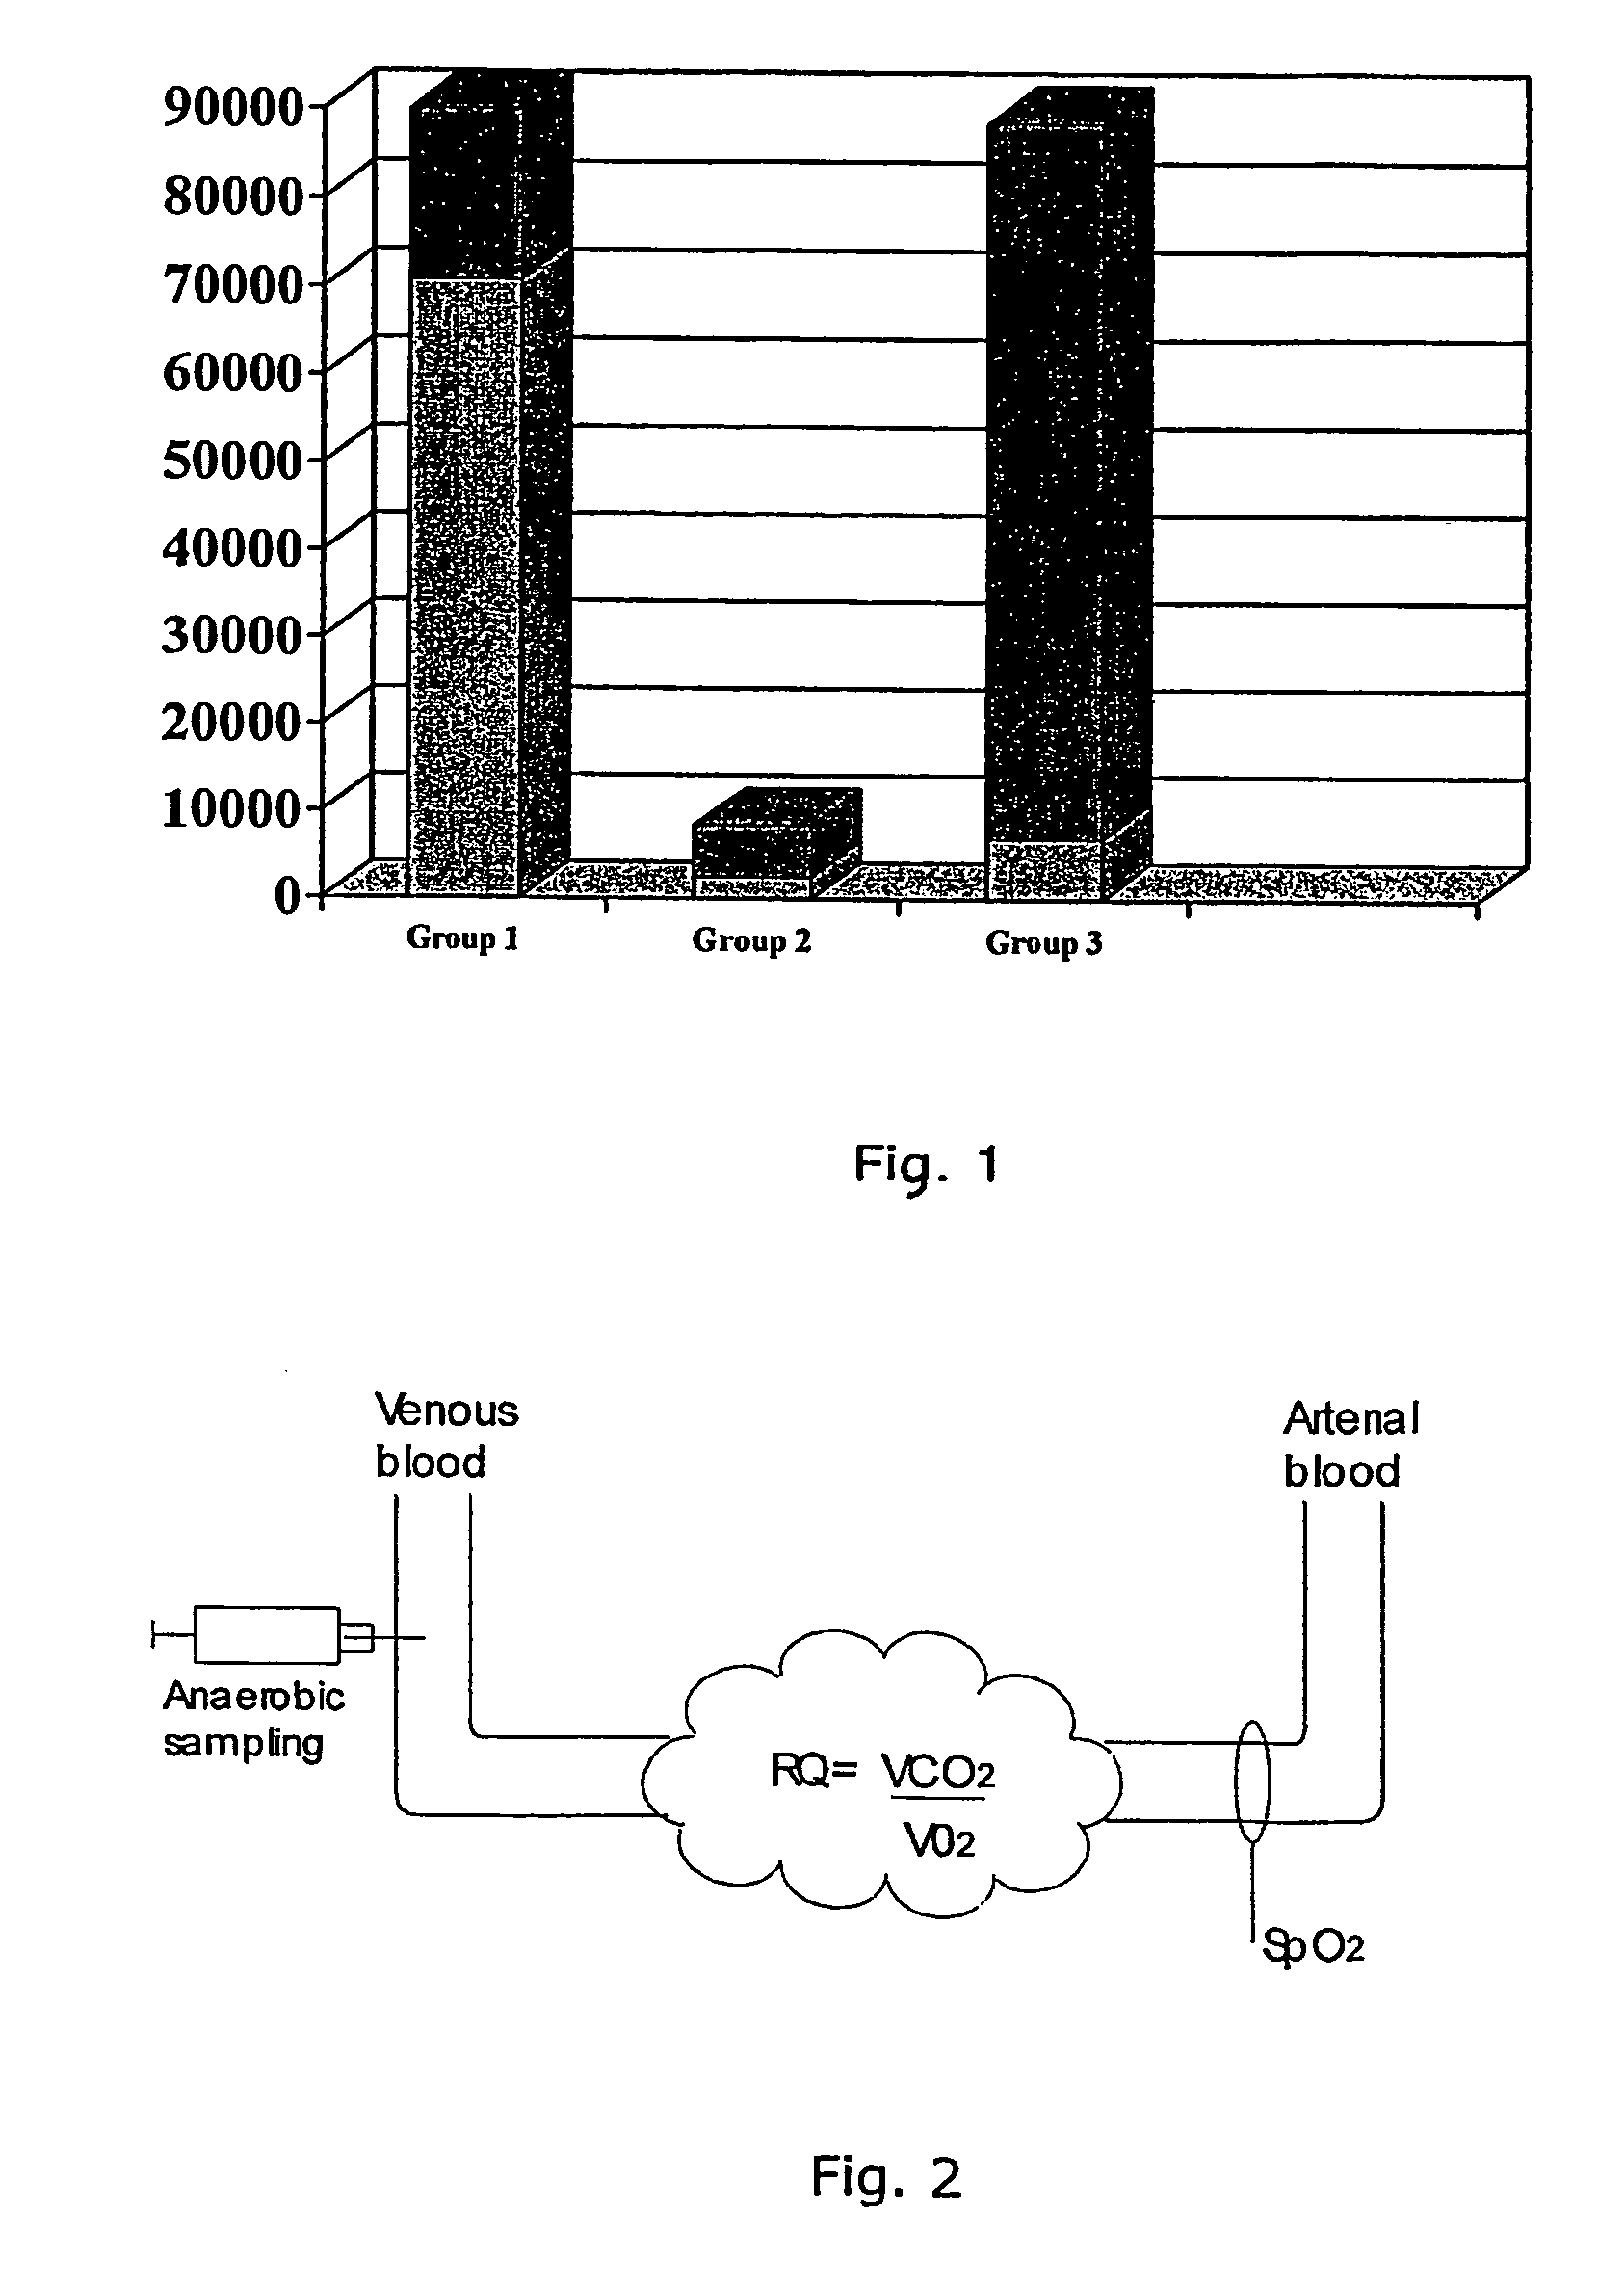 Method, system and devices for converting venous blood values to arterial blood values